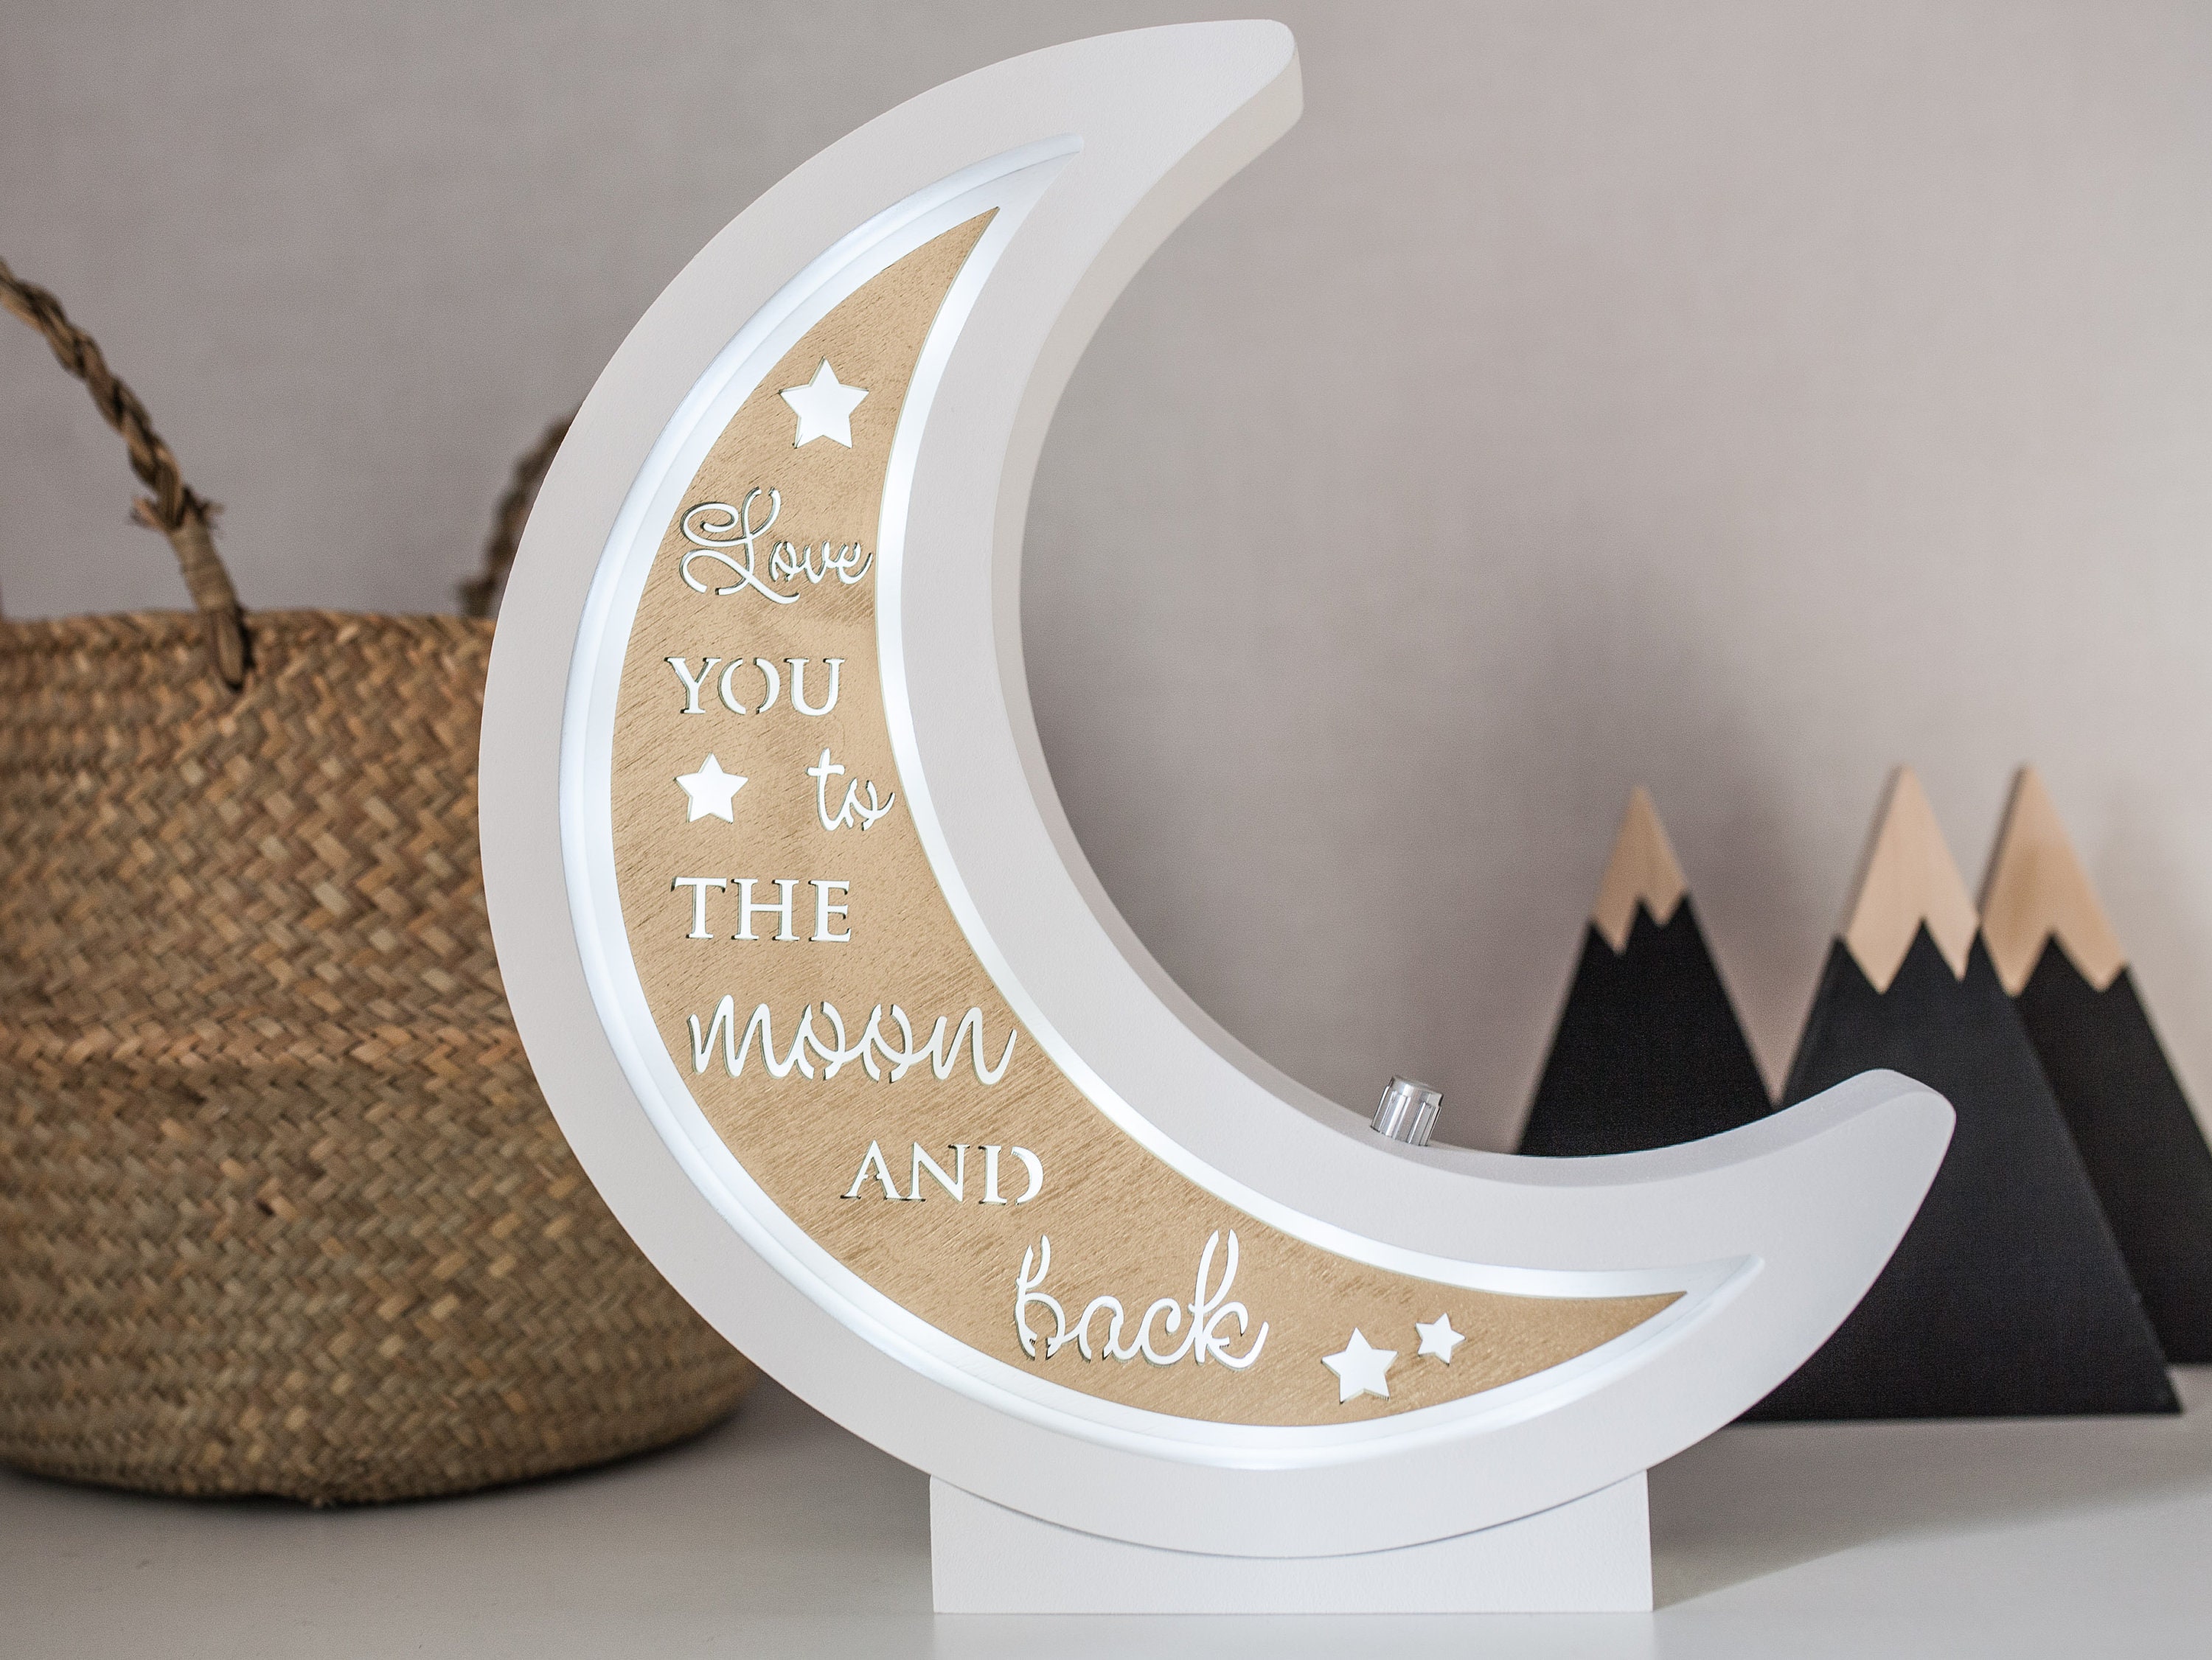 LED Moon Shaped MARQUEE Signs Light Up Moon Night Lights Battery Operated Crescent Moon Lamp for Bedroom Christmas Birthday Party Decor-Moon(White)